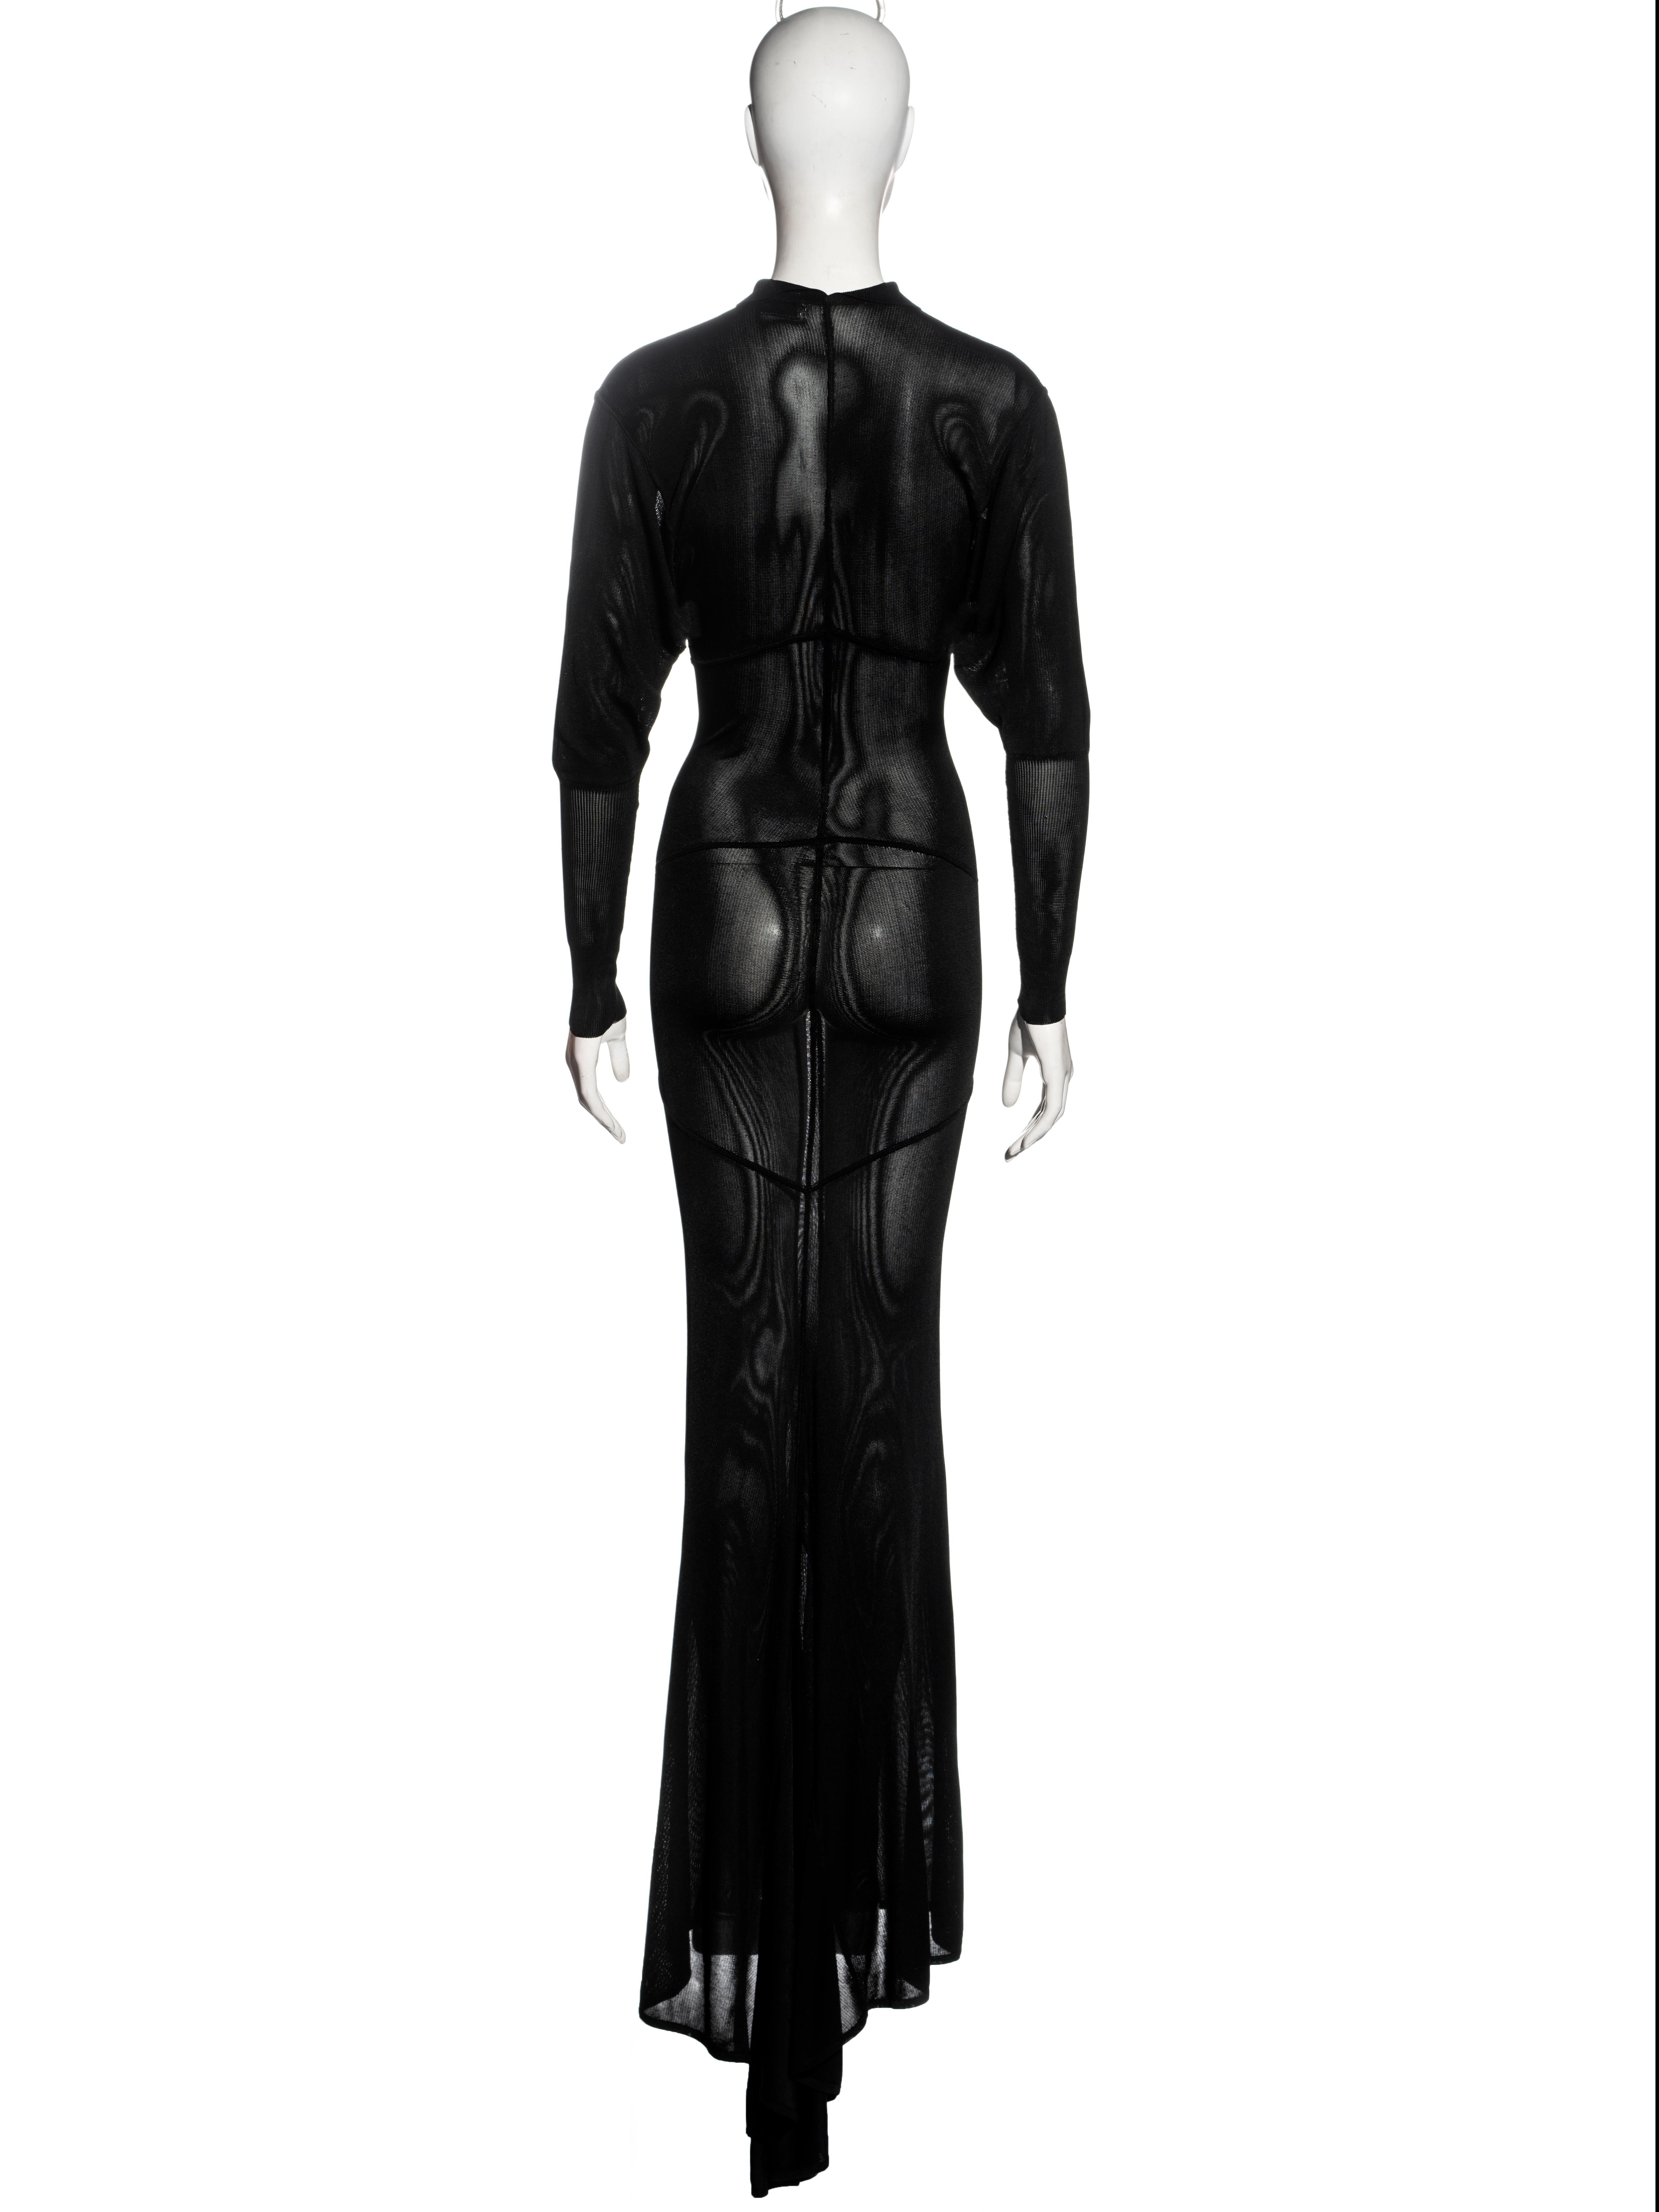 Azzedine Alaia black acetate knit evening dress with train, fw 1986 For Sale 1